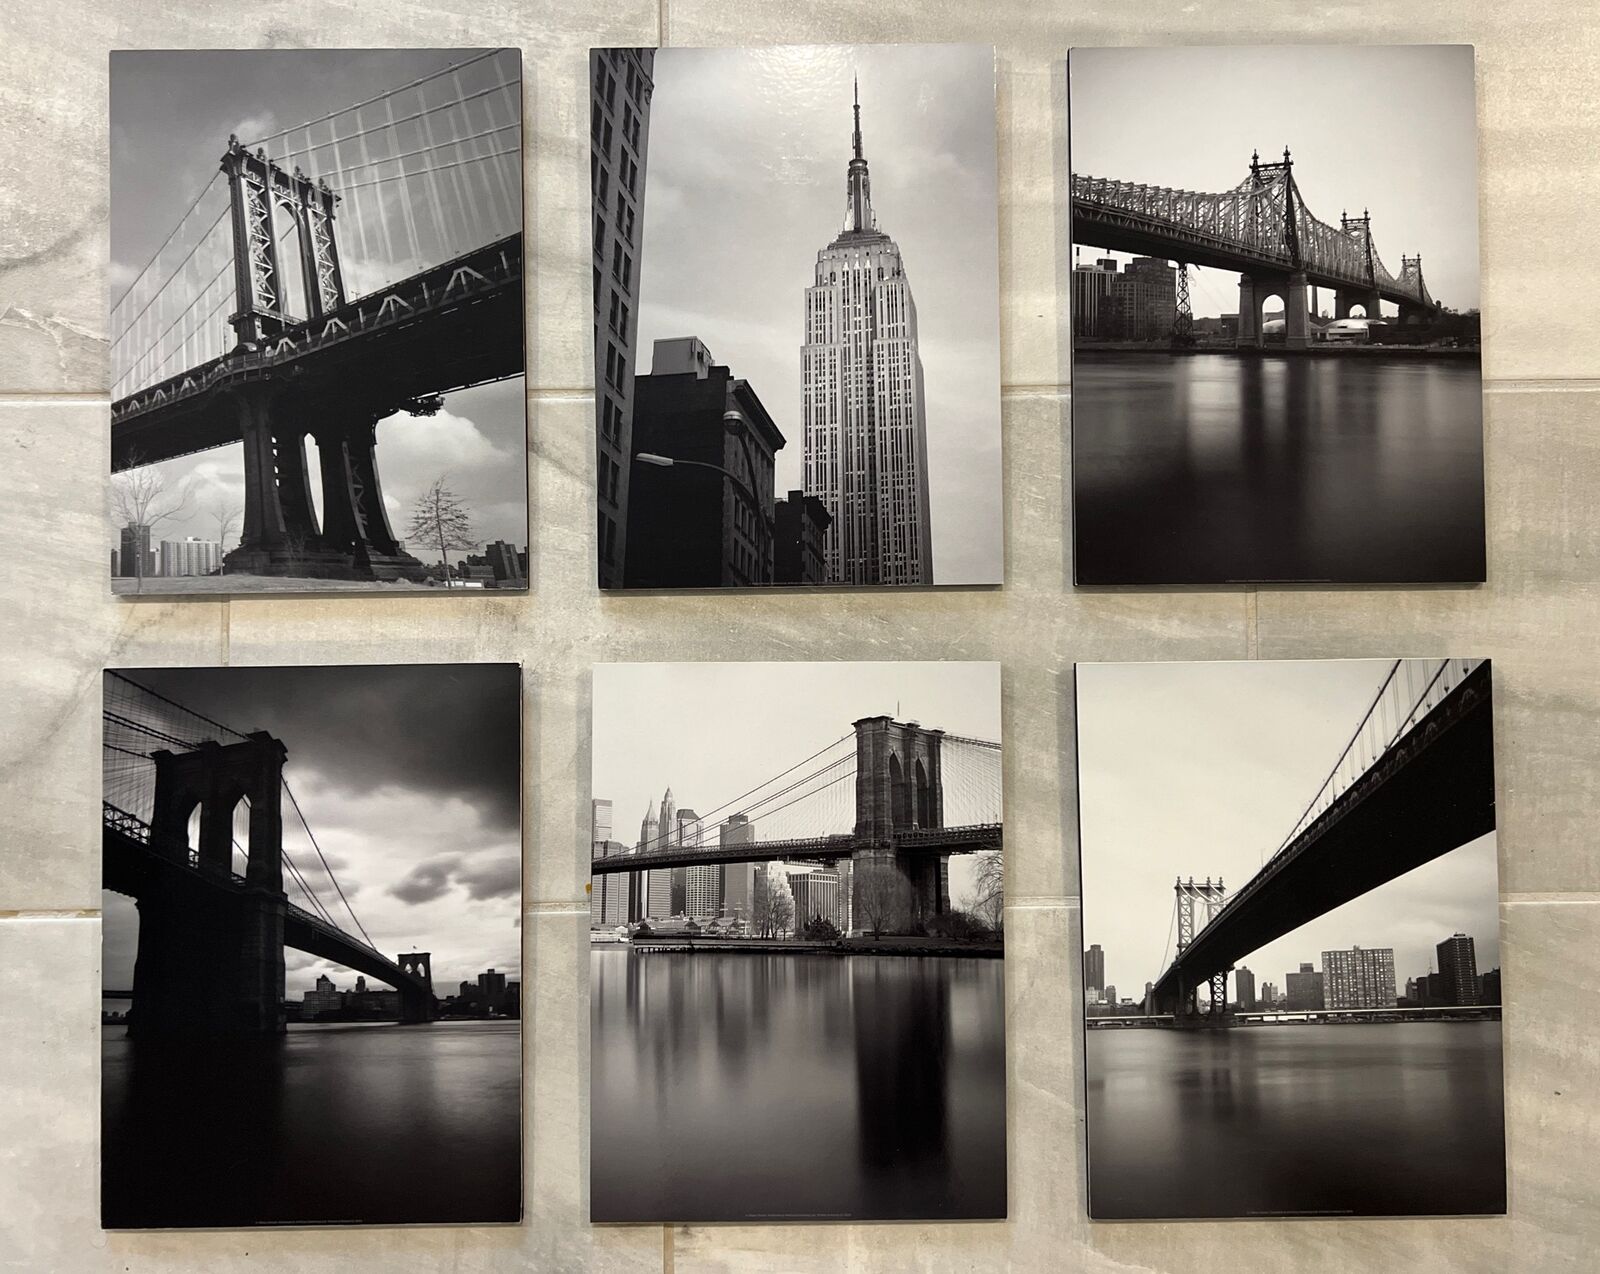 IKEA gronby Brooklyn Bridge NYC Black White Pictures Set of 6